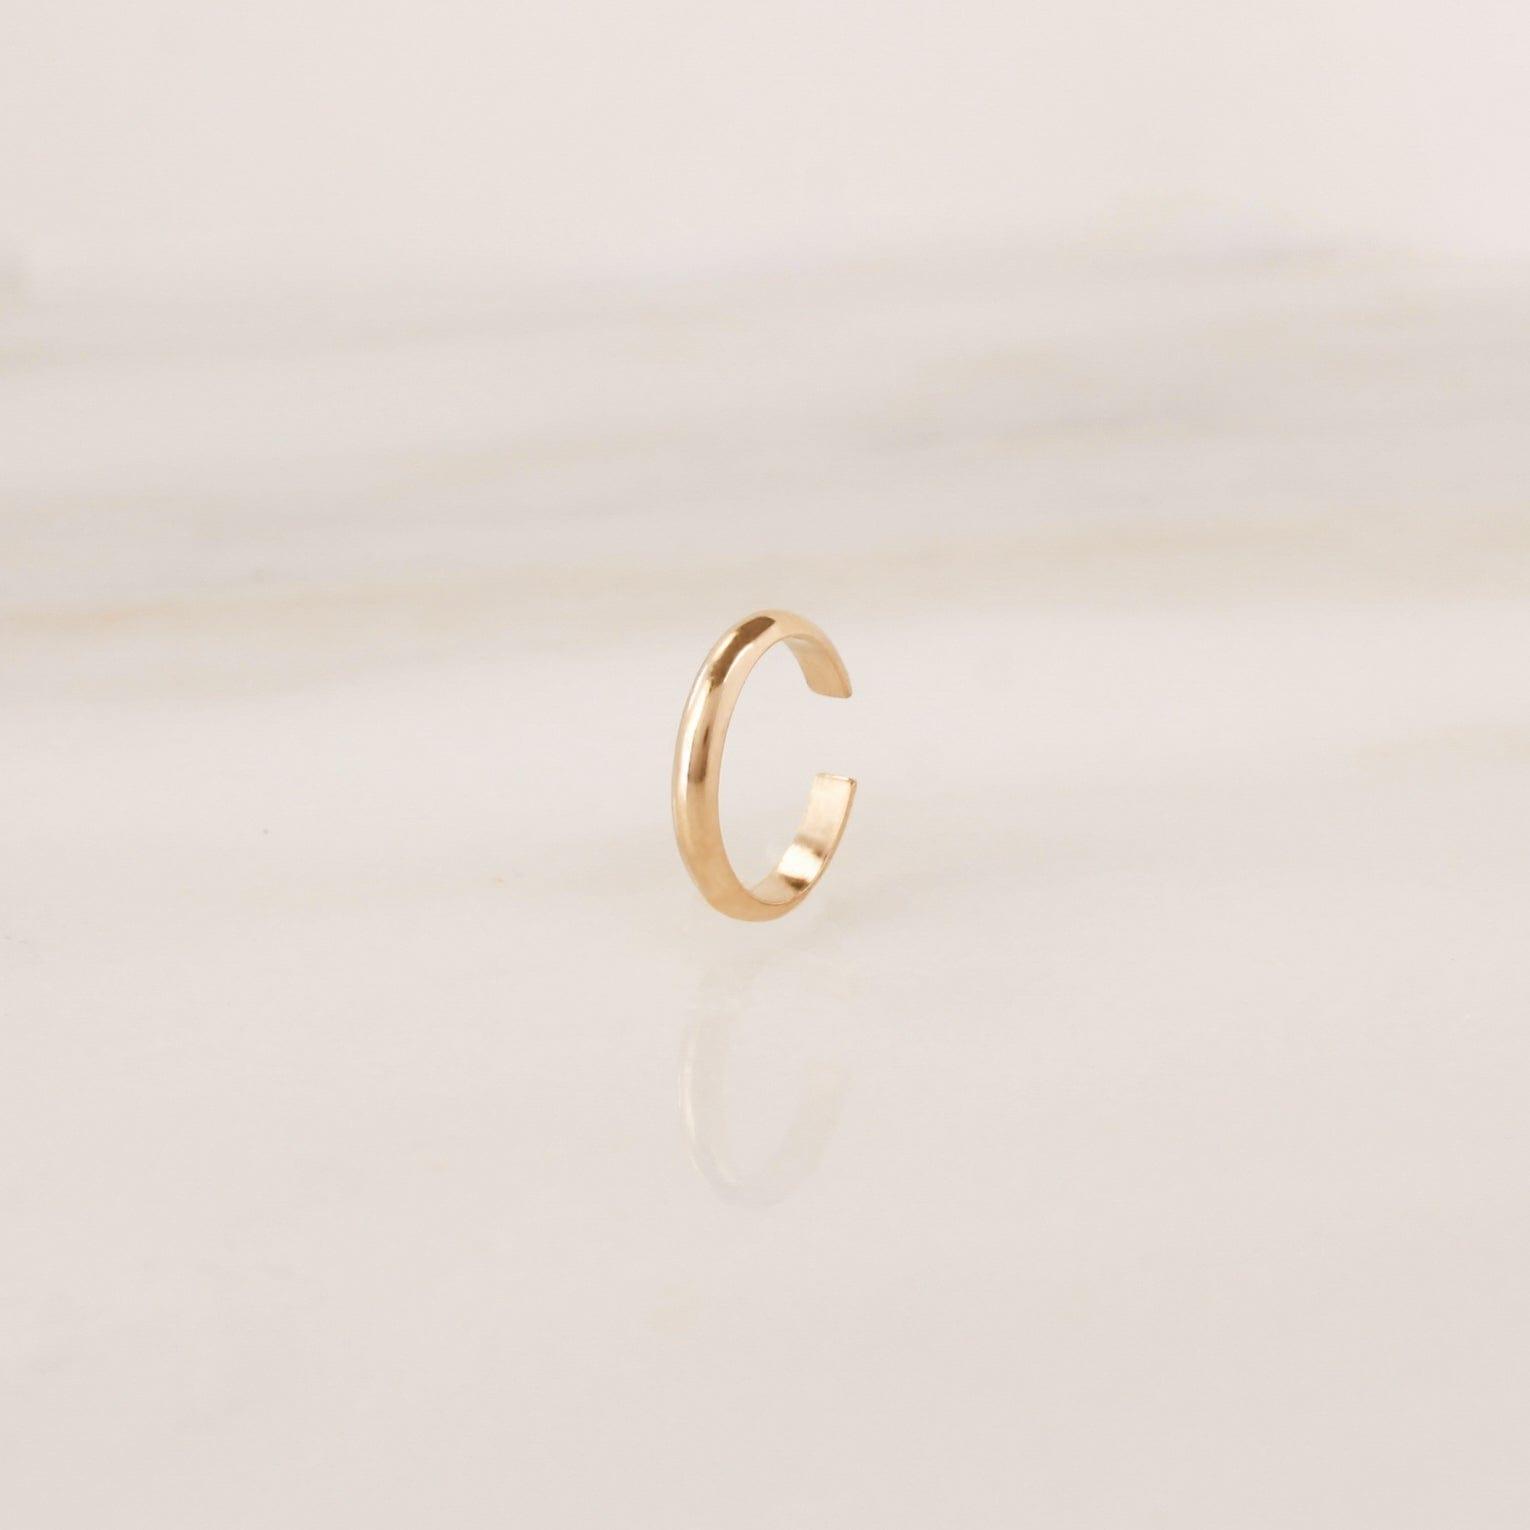 Ear Cuff - Nolia Jewelry - Meaningful + Sustainably Handcrafted Jewelry